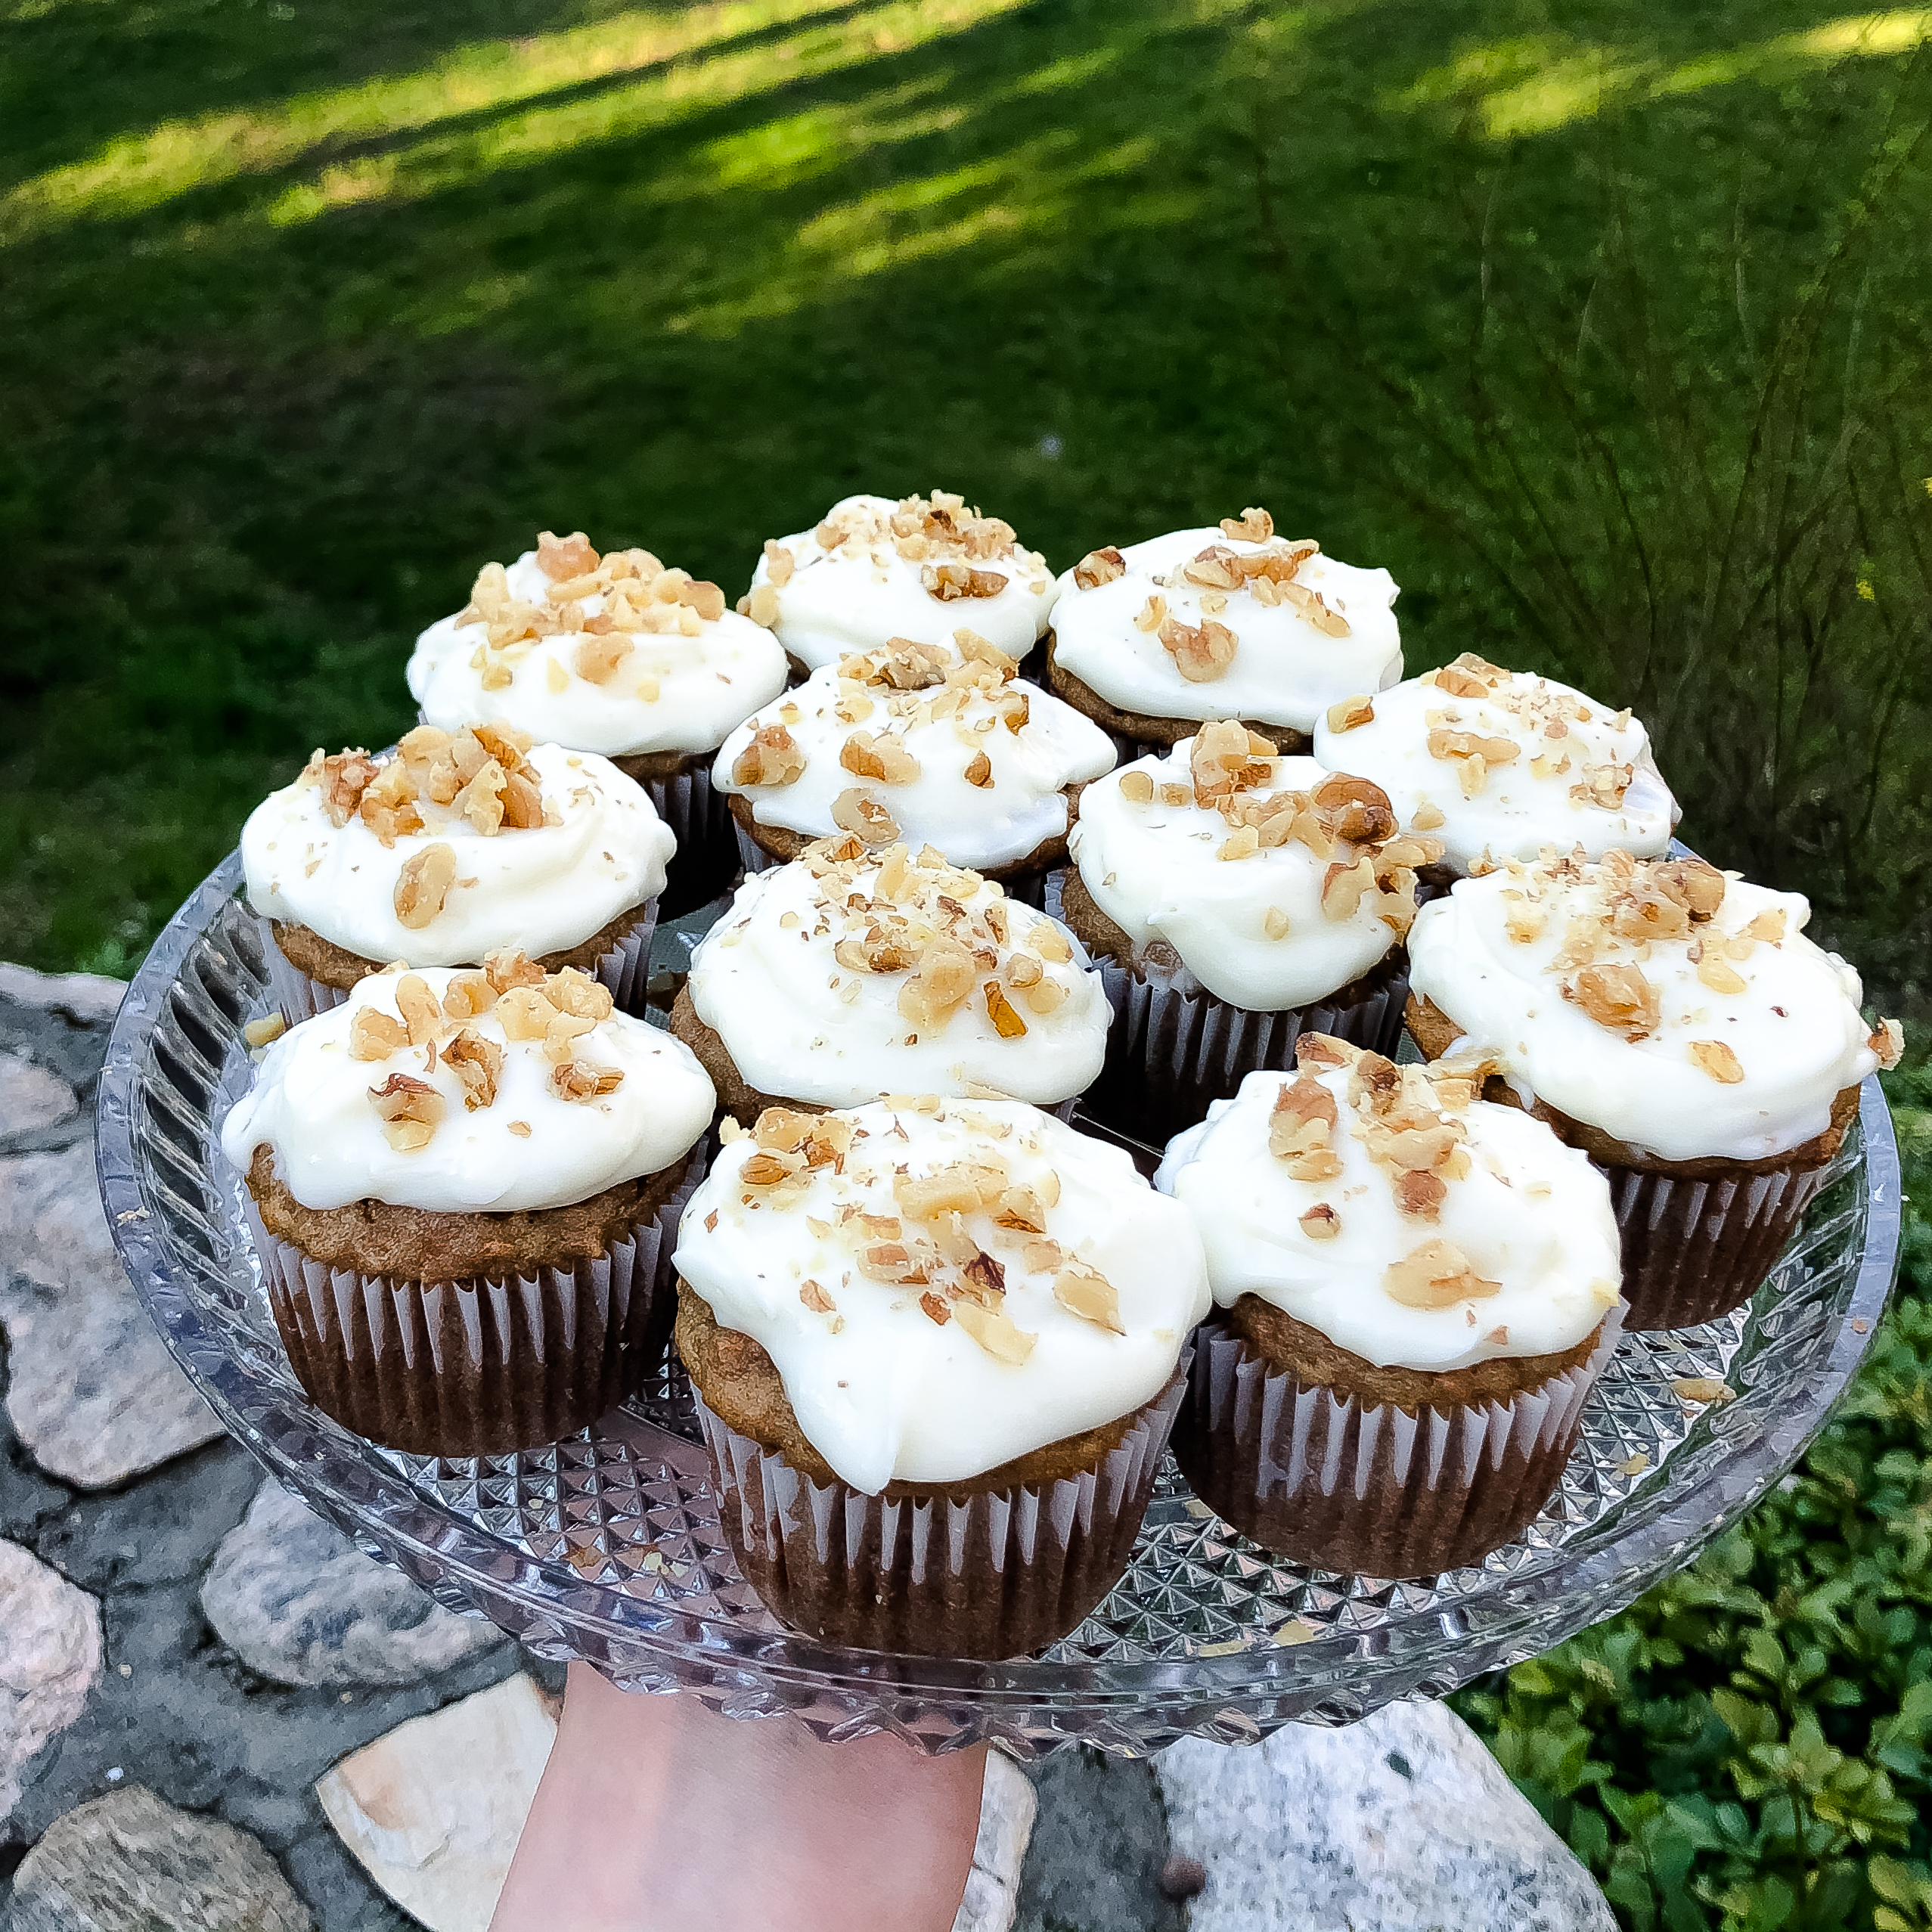 Finished plate of easy gluten free carrot cake cupcakes with cream cheese frosting with chopped walnuts on top